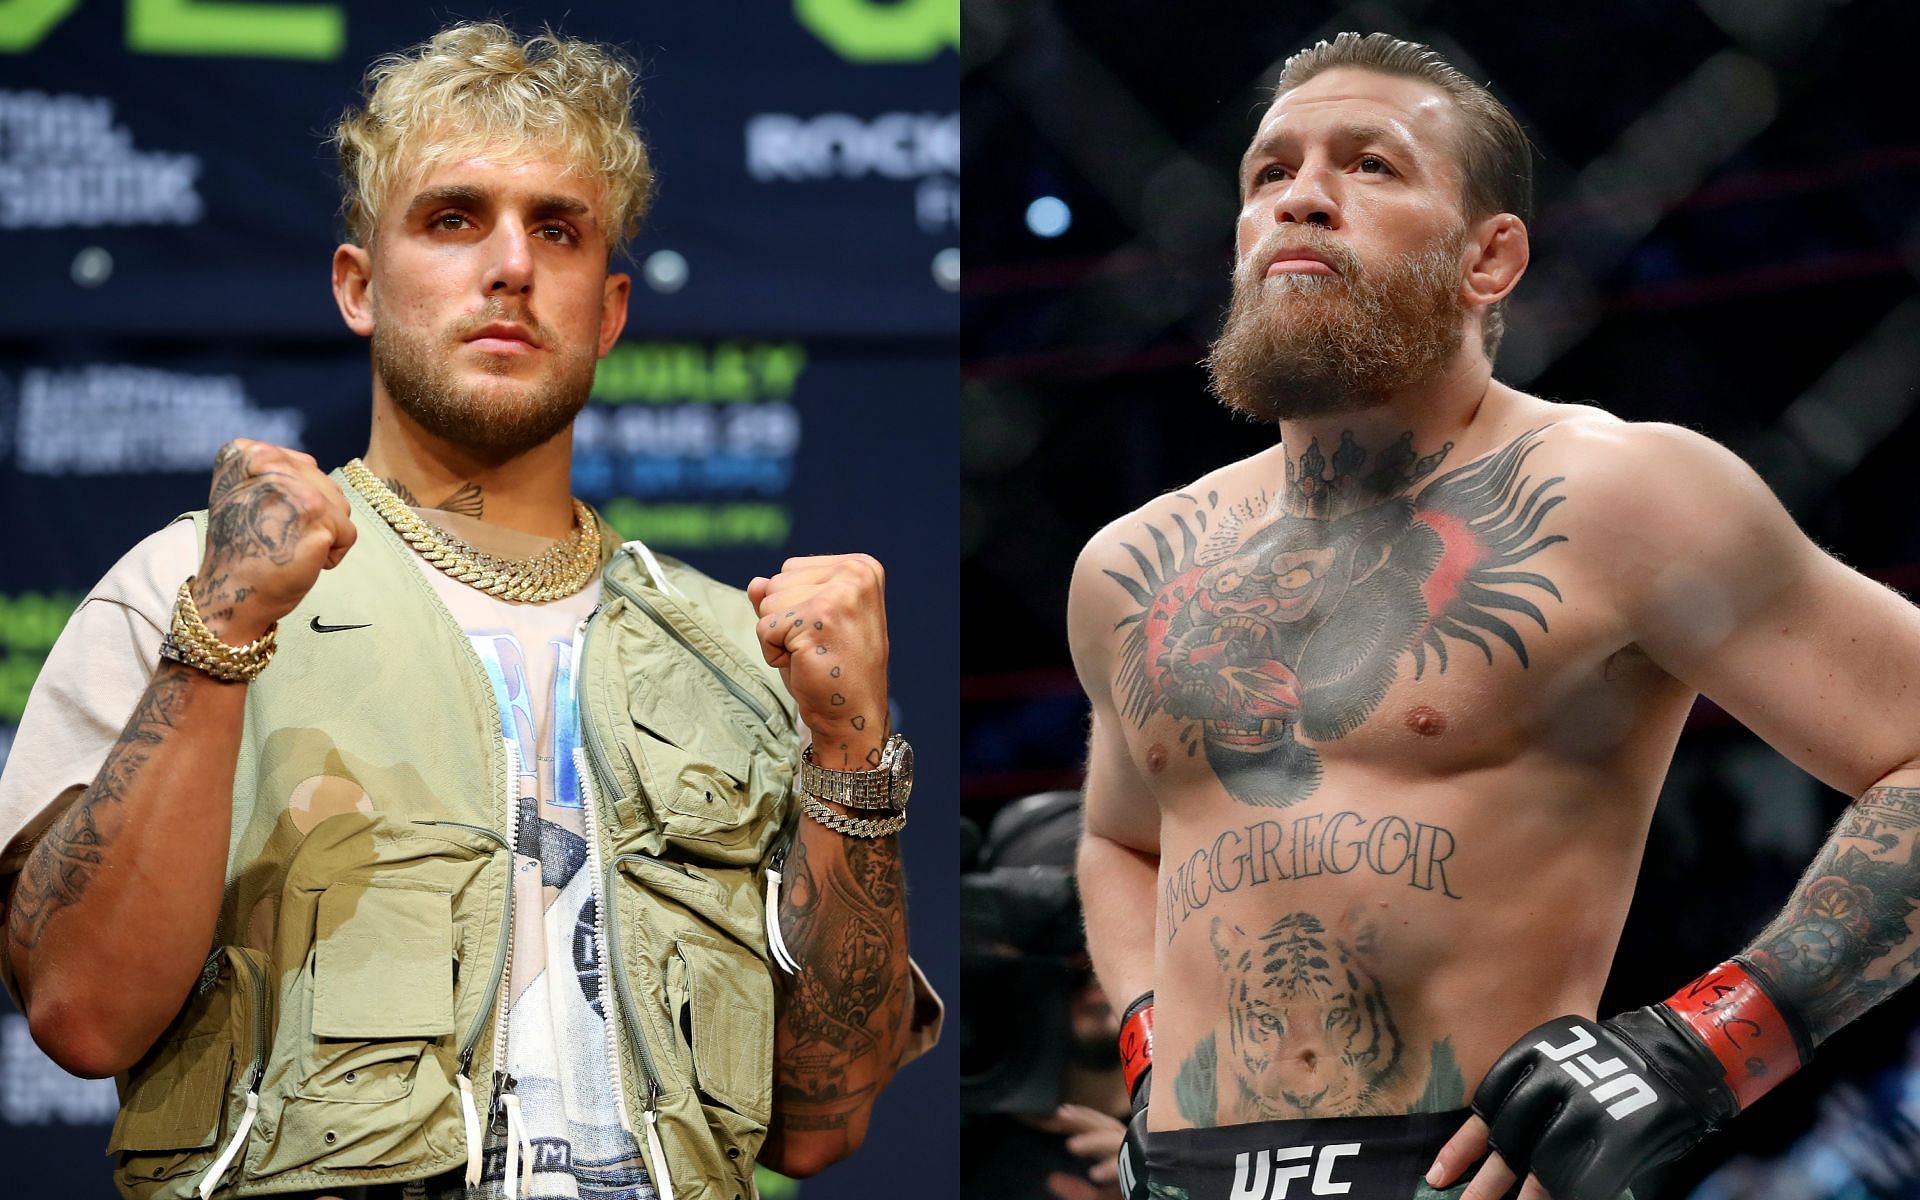 Jake Paul (left) and Conor McGregor (right) [Image credits: Getty Images]